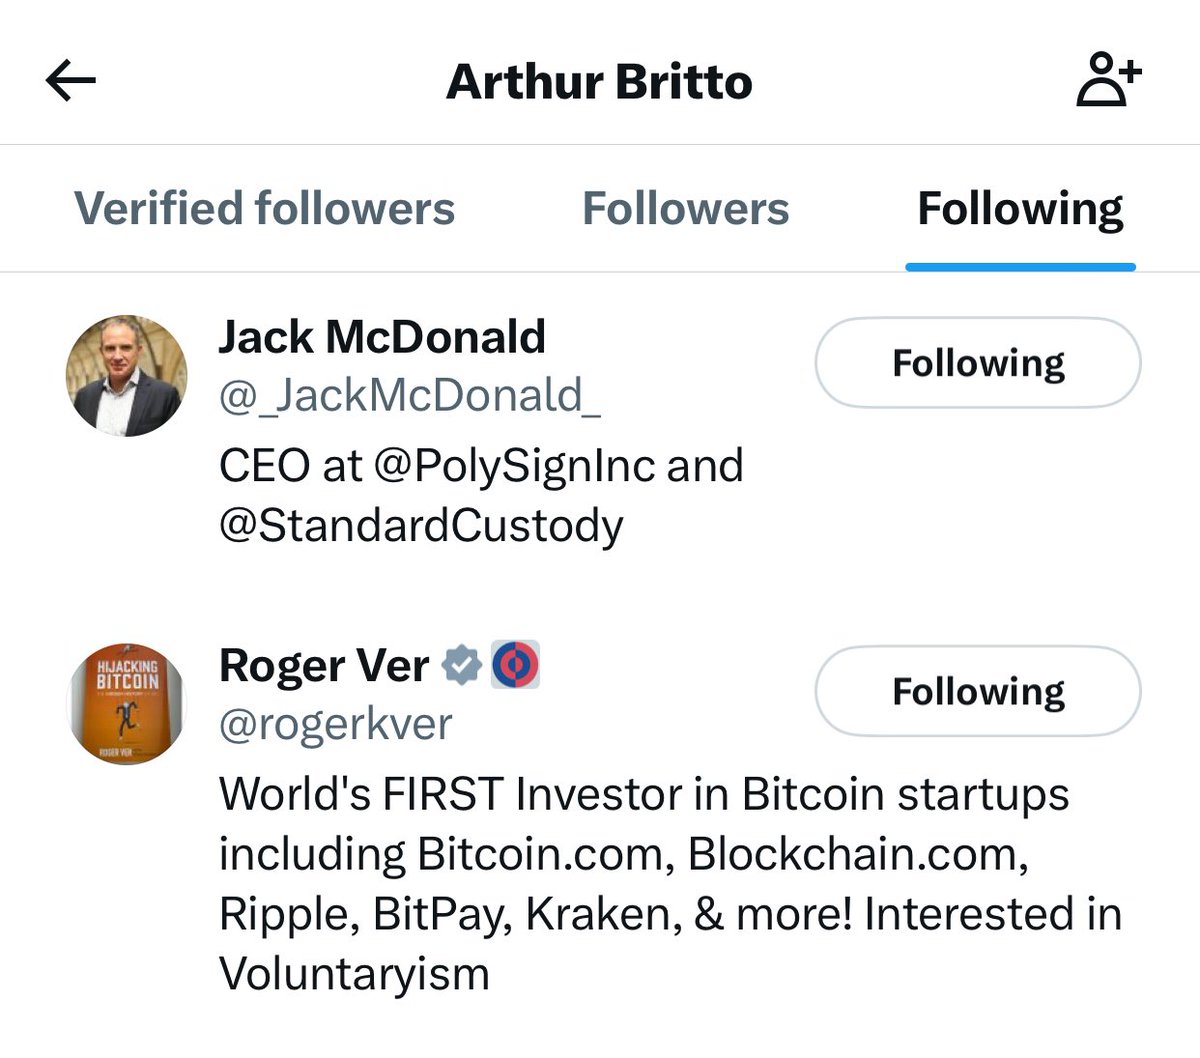 @JoelKatz 1 of the only 2 People that Arthur follows on here, must be for good reason!